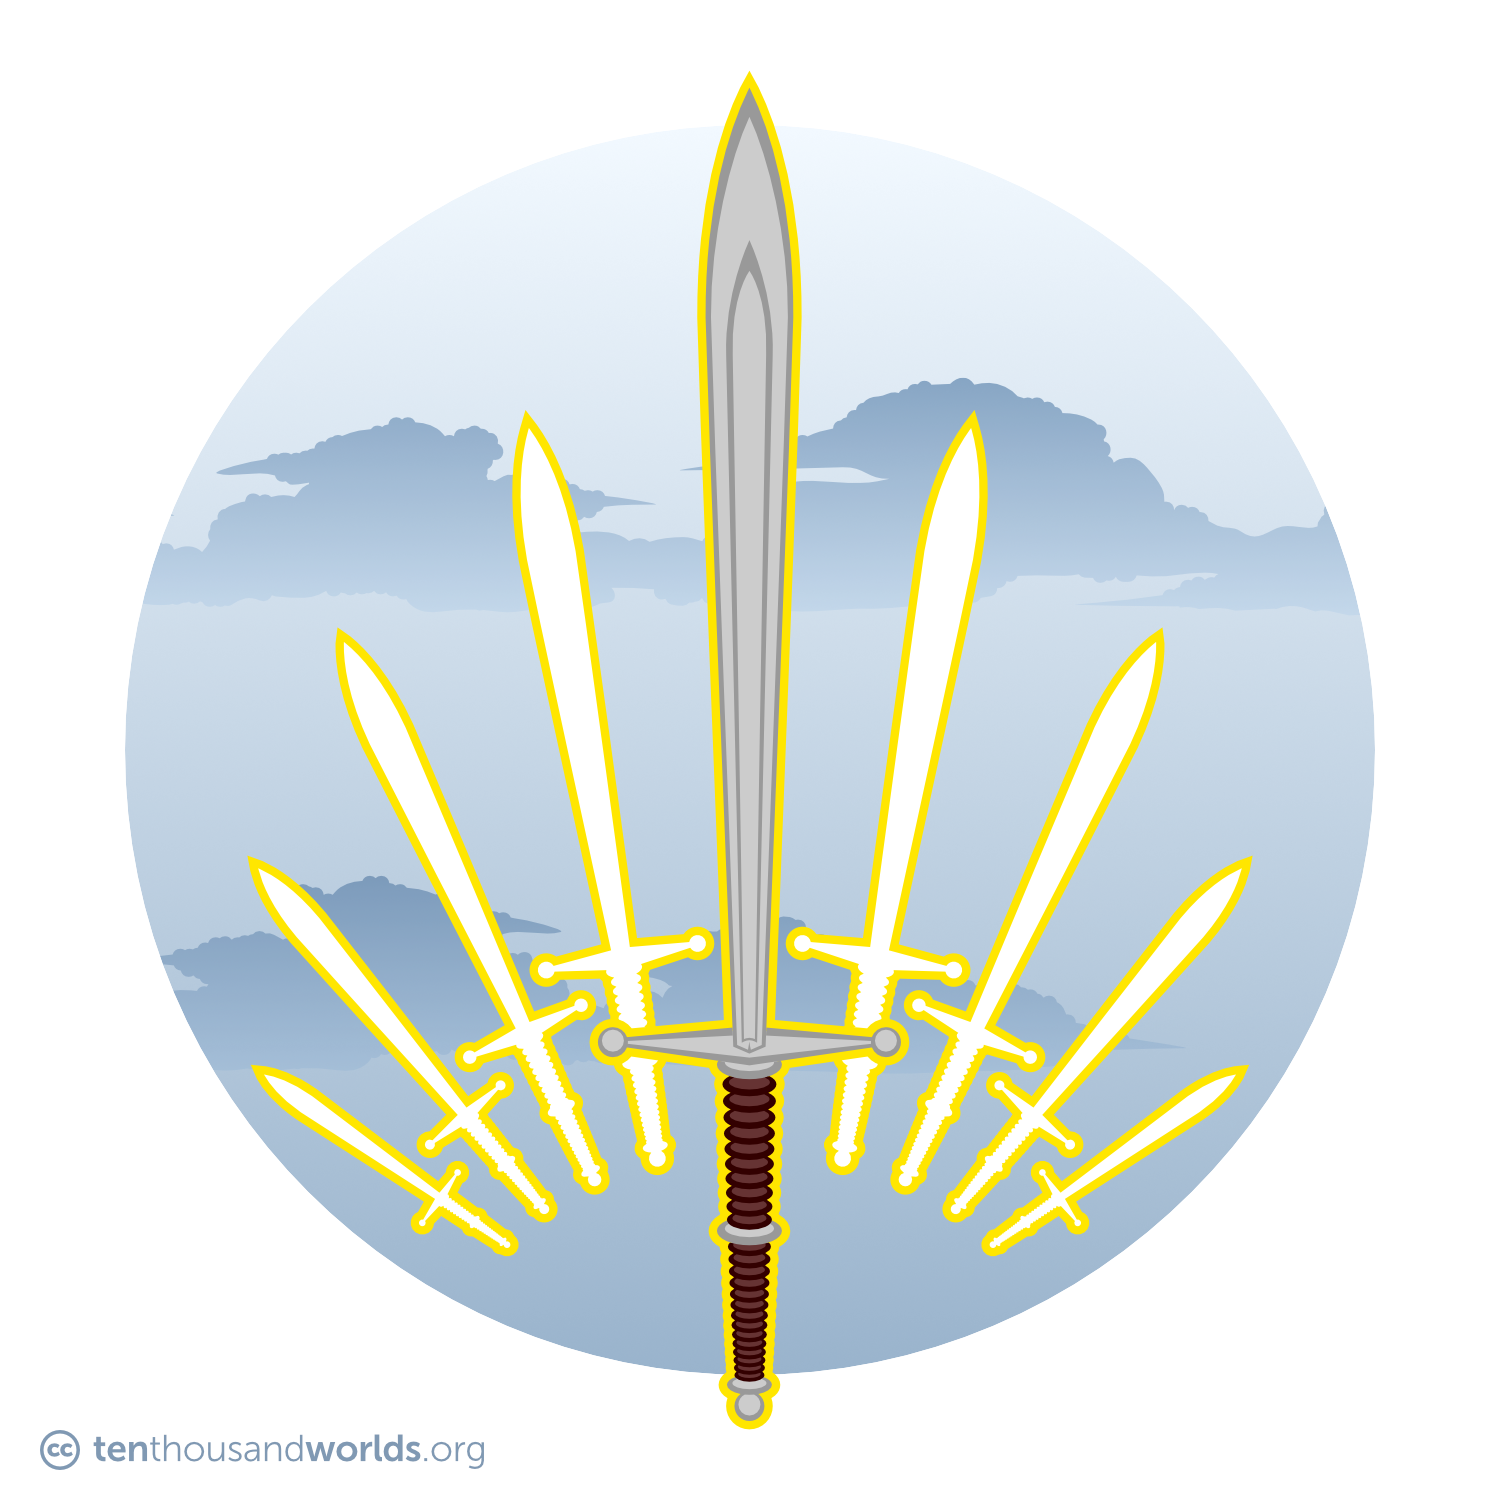 A sleek, simple two-handed sword with a guard and pommel that end in spheres, pointing upward. It glows with a golden light Behind it, the glowing silhouettes of eight other swords fall away to both sides in an arc.